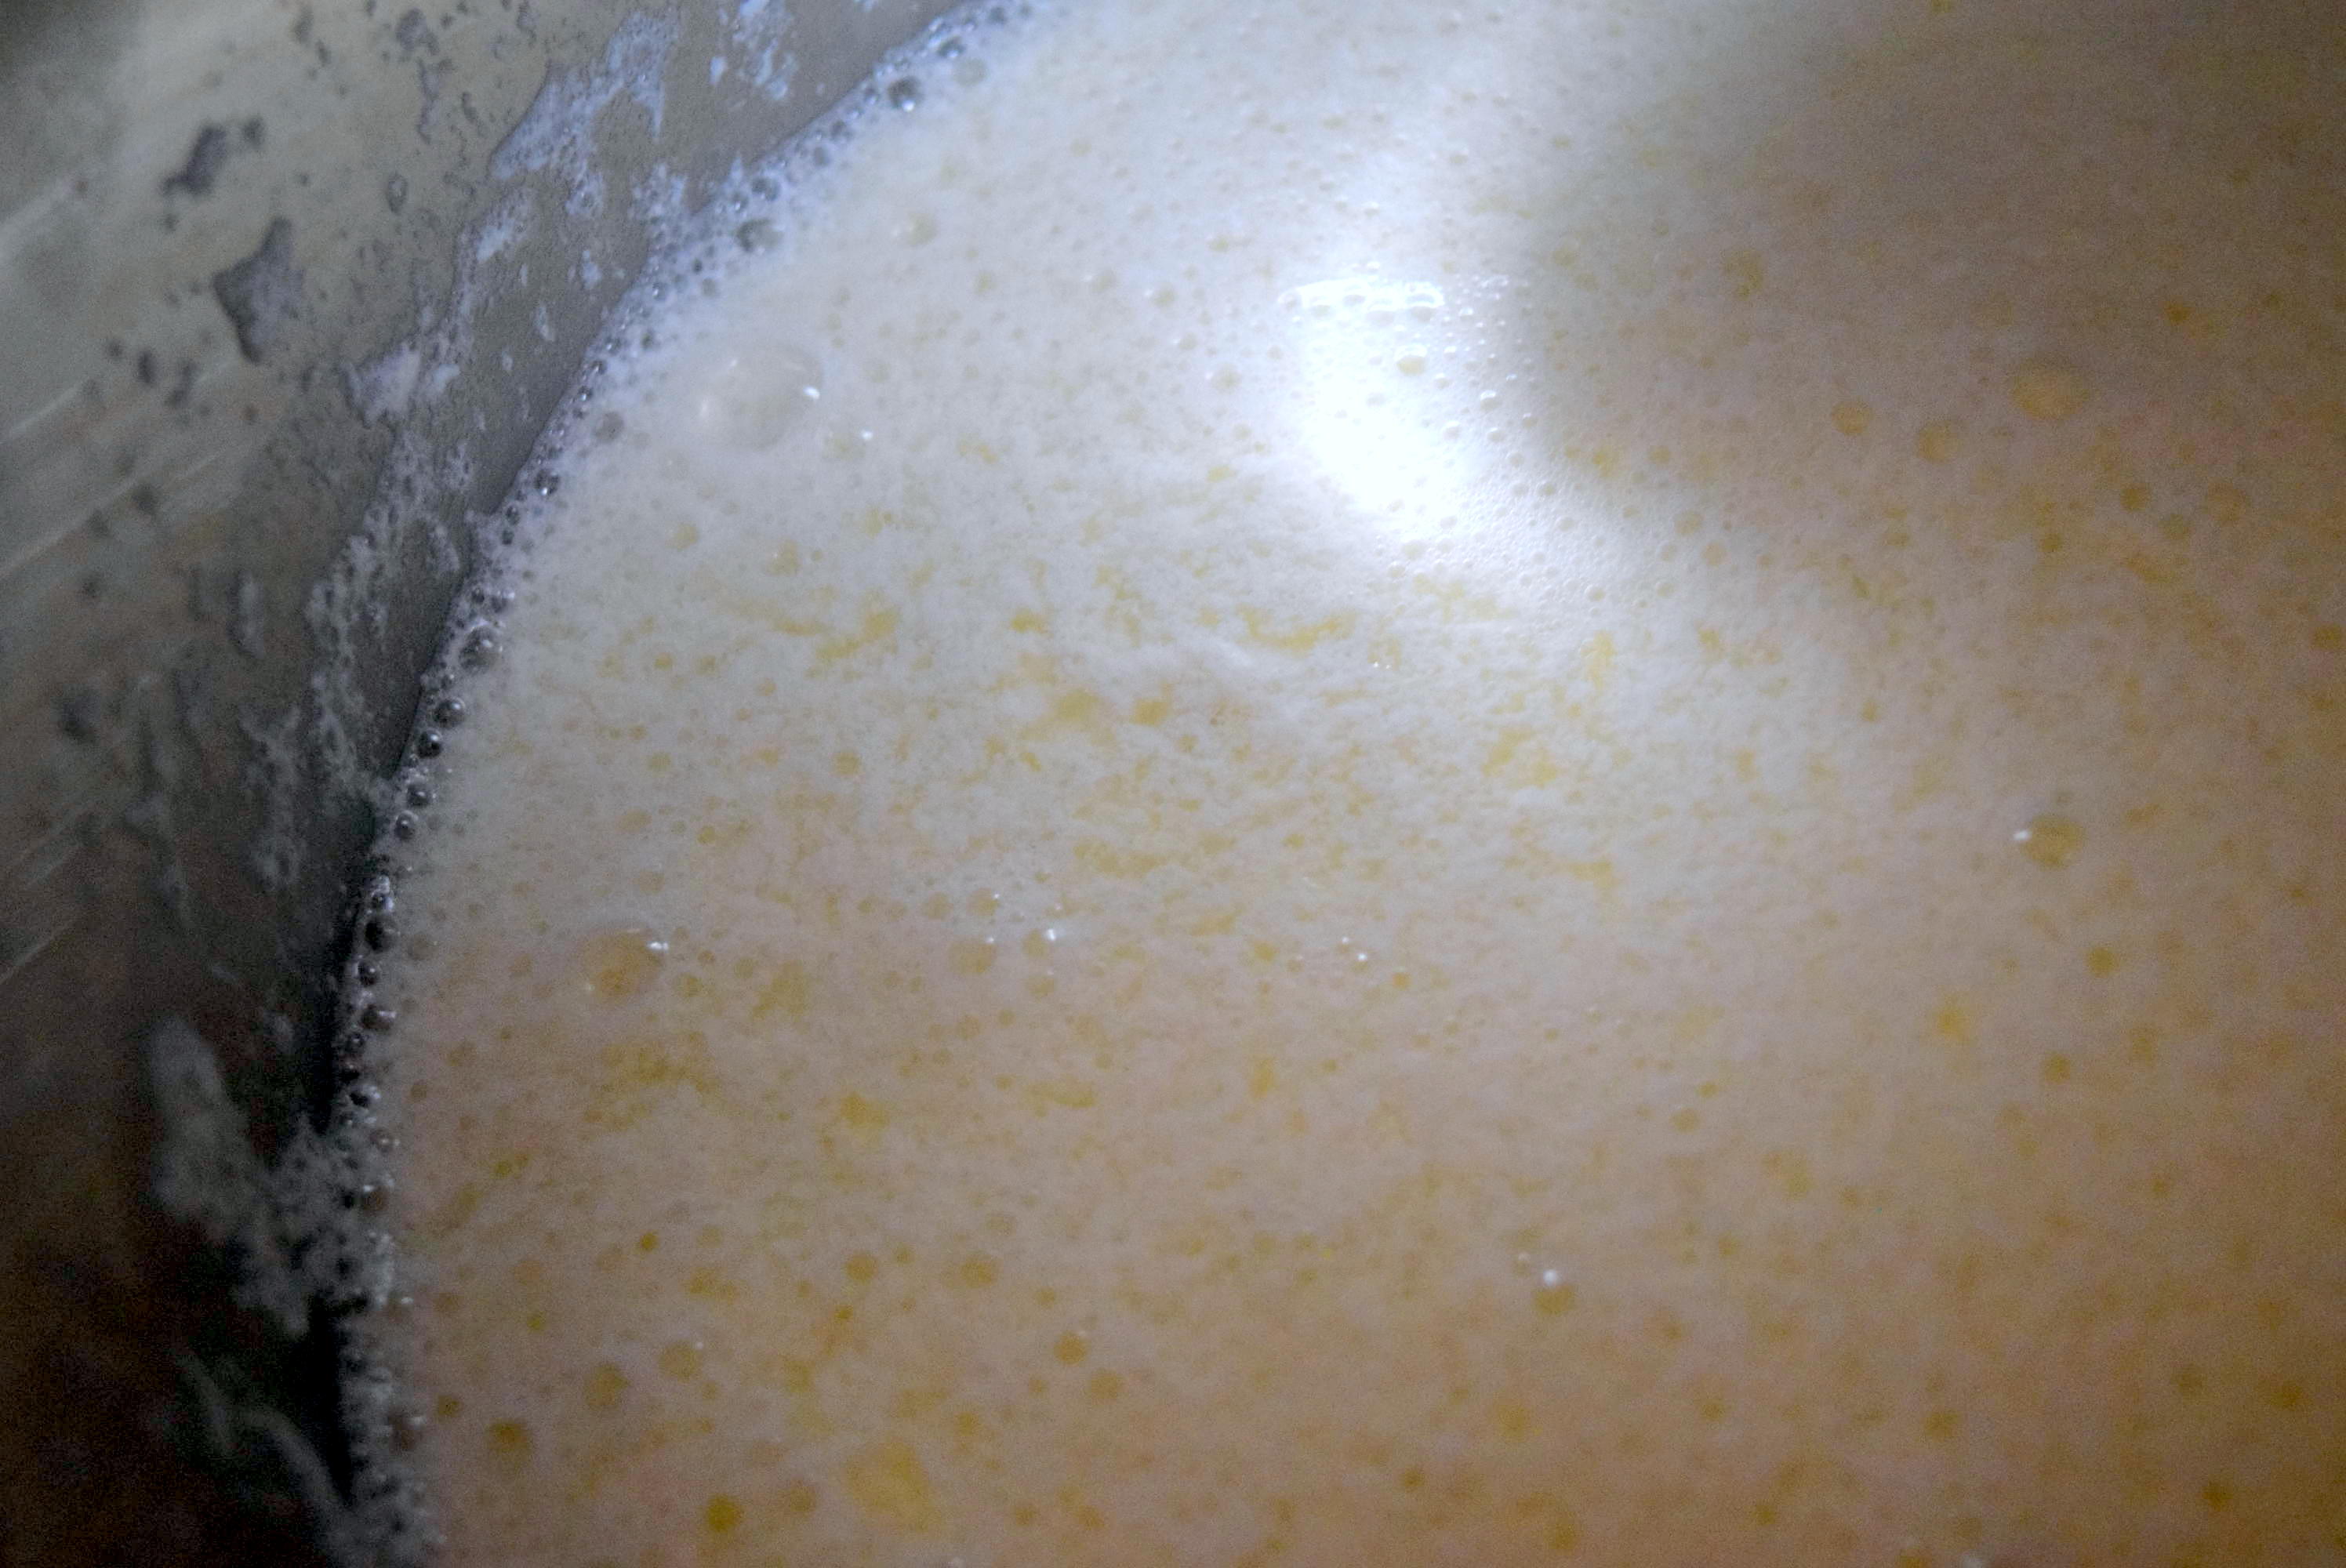 Curdled milk for Homemade Instant Pot Ricotta Cheese up close